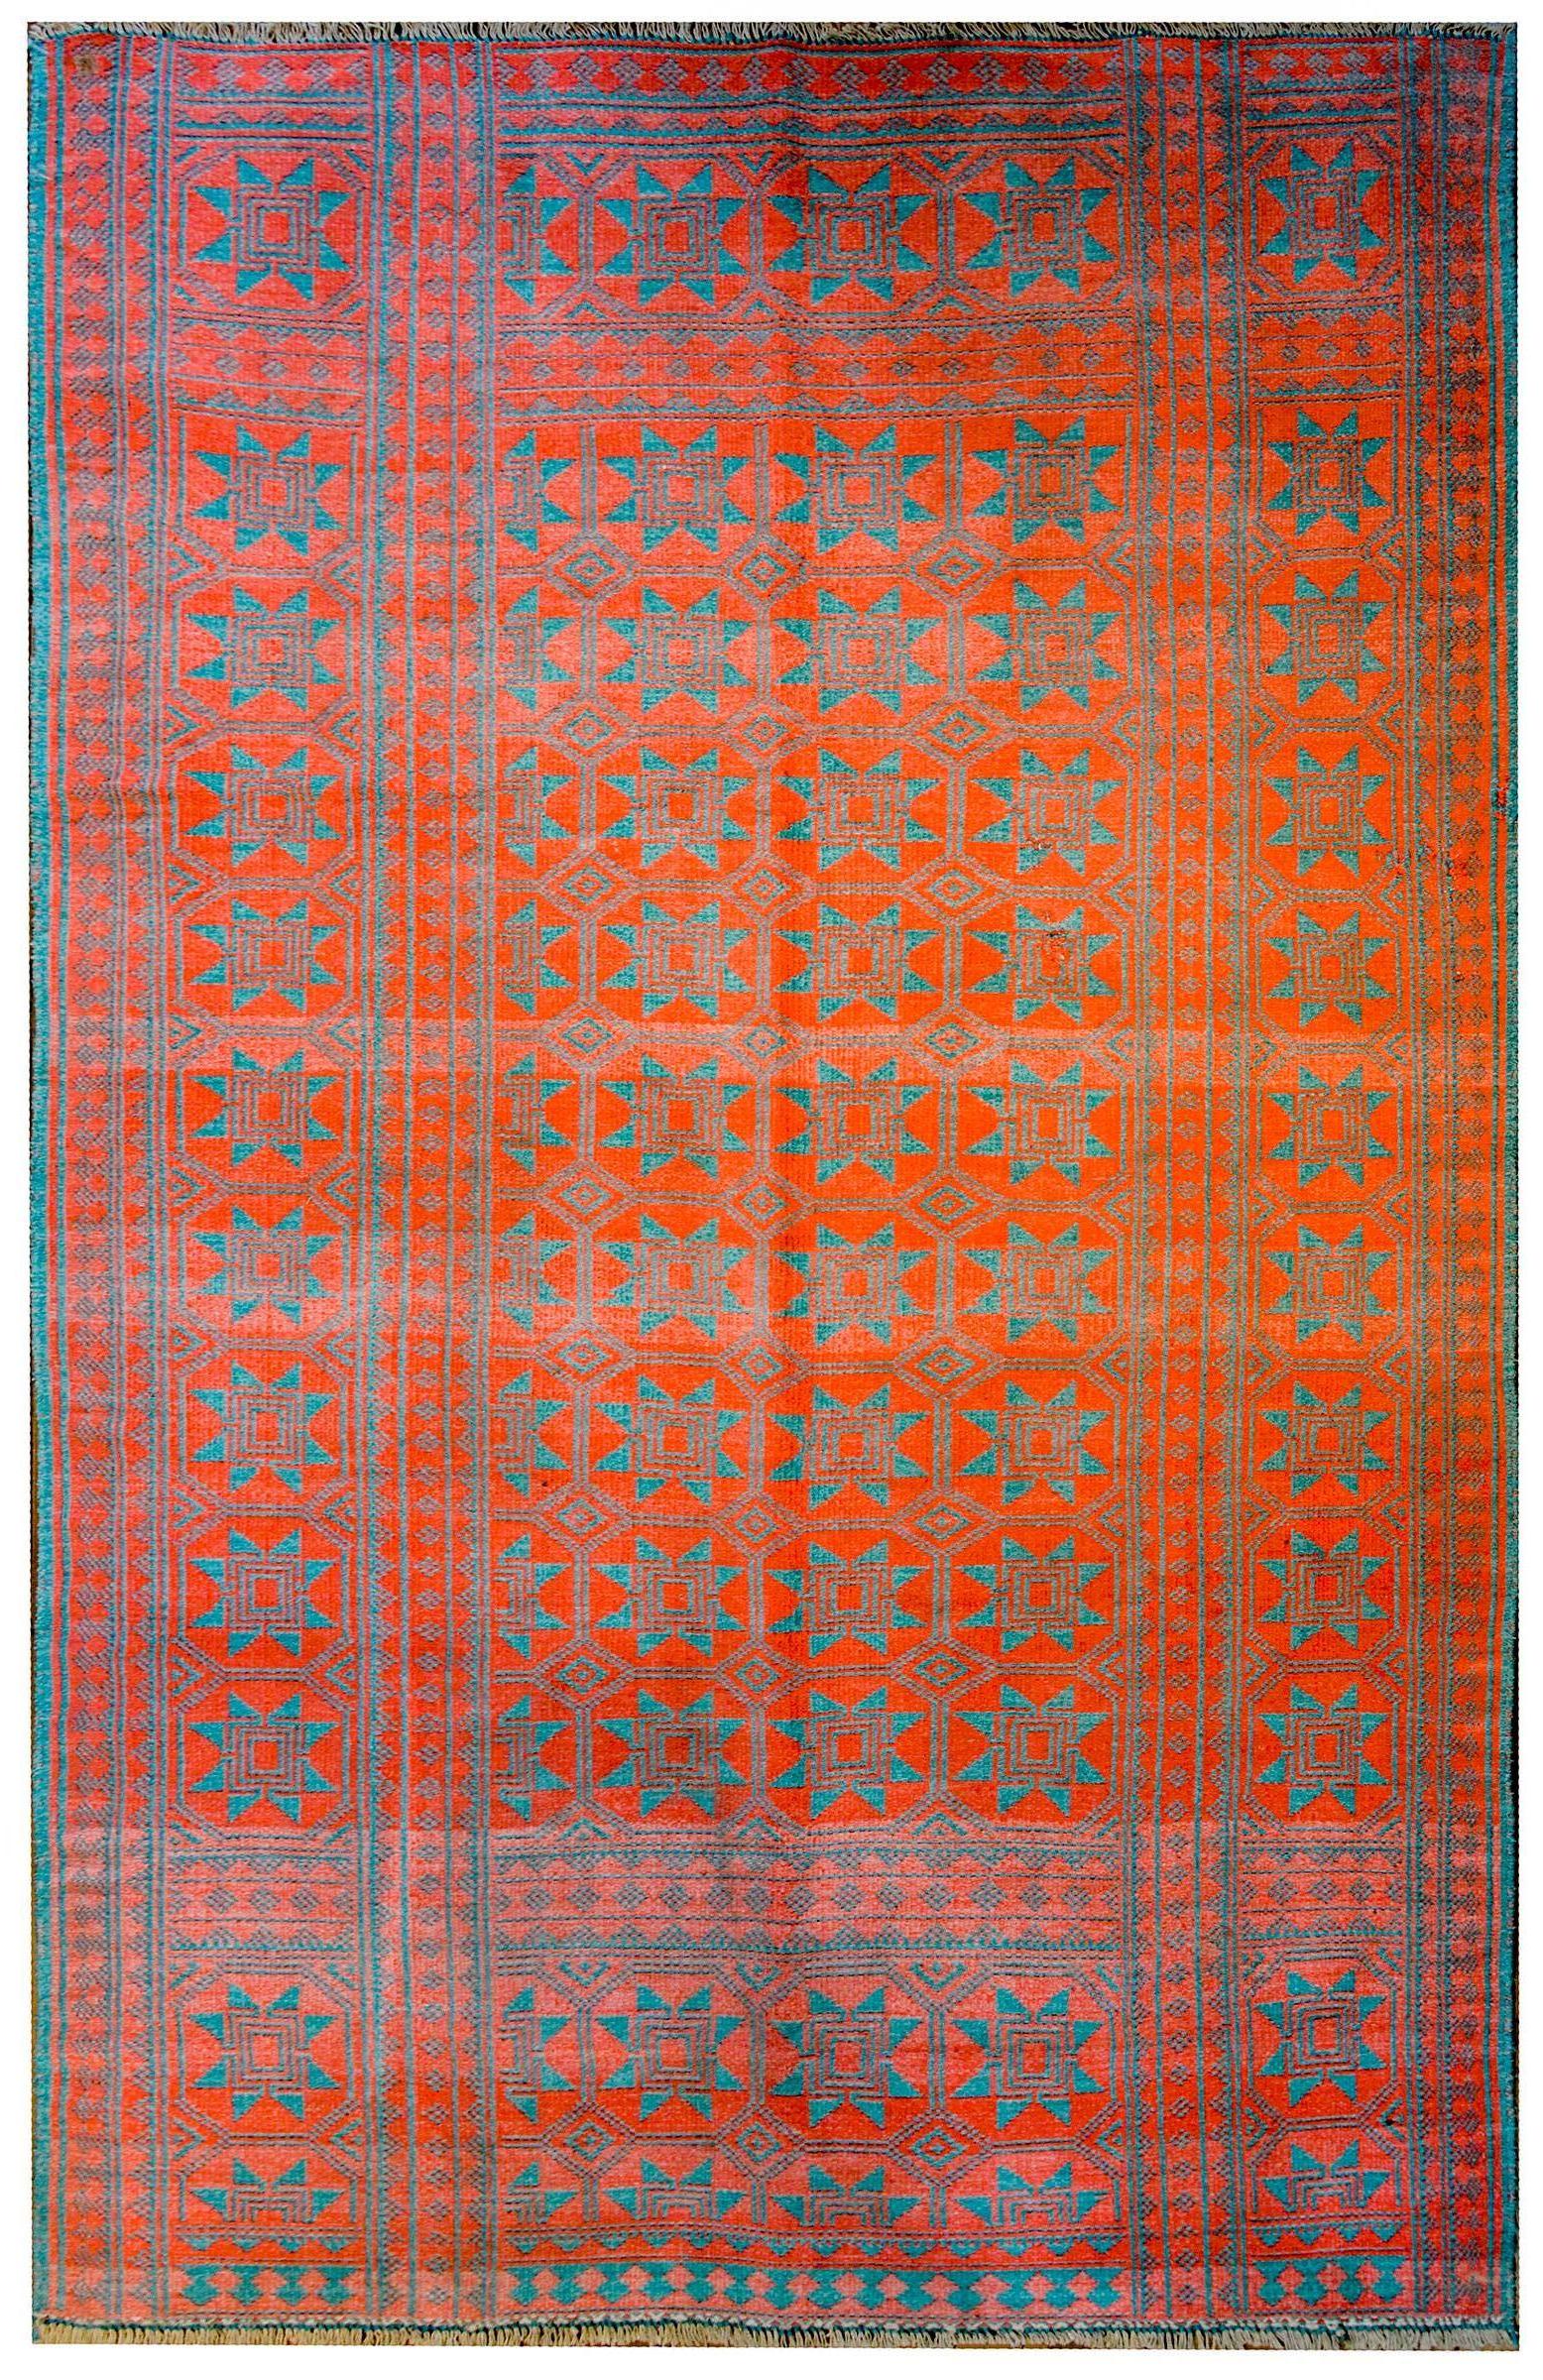 An amazing early 20th century Persian reversible Saveh Kilim rug, woven with a fantastic all-over large scale geometric floral lattice pattern woven in wonderful coral red and turquoise dyed cotton. The rug is reversible, so you get two rugs in one!